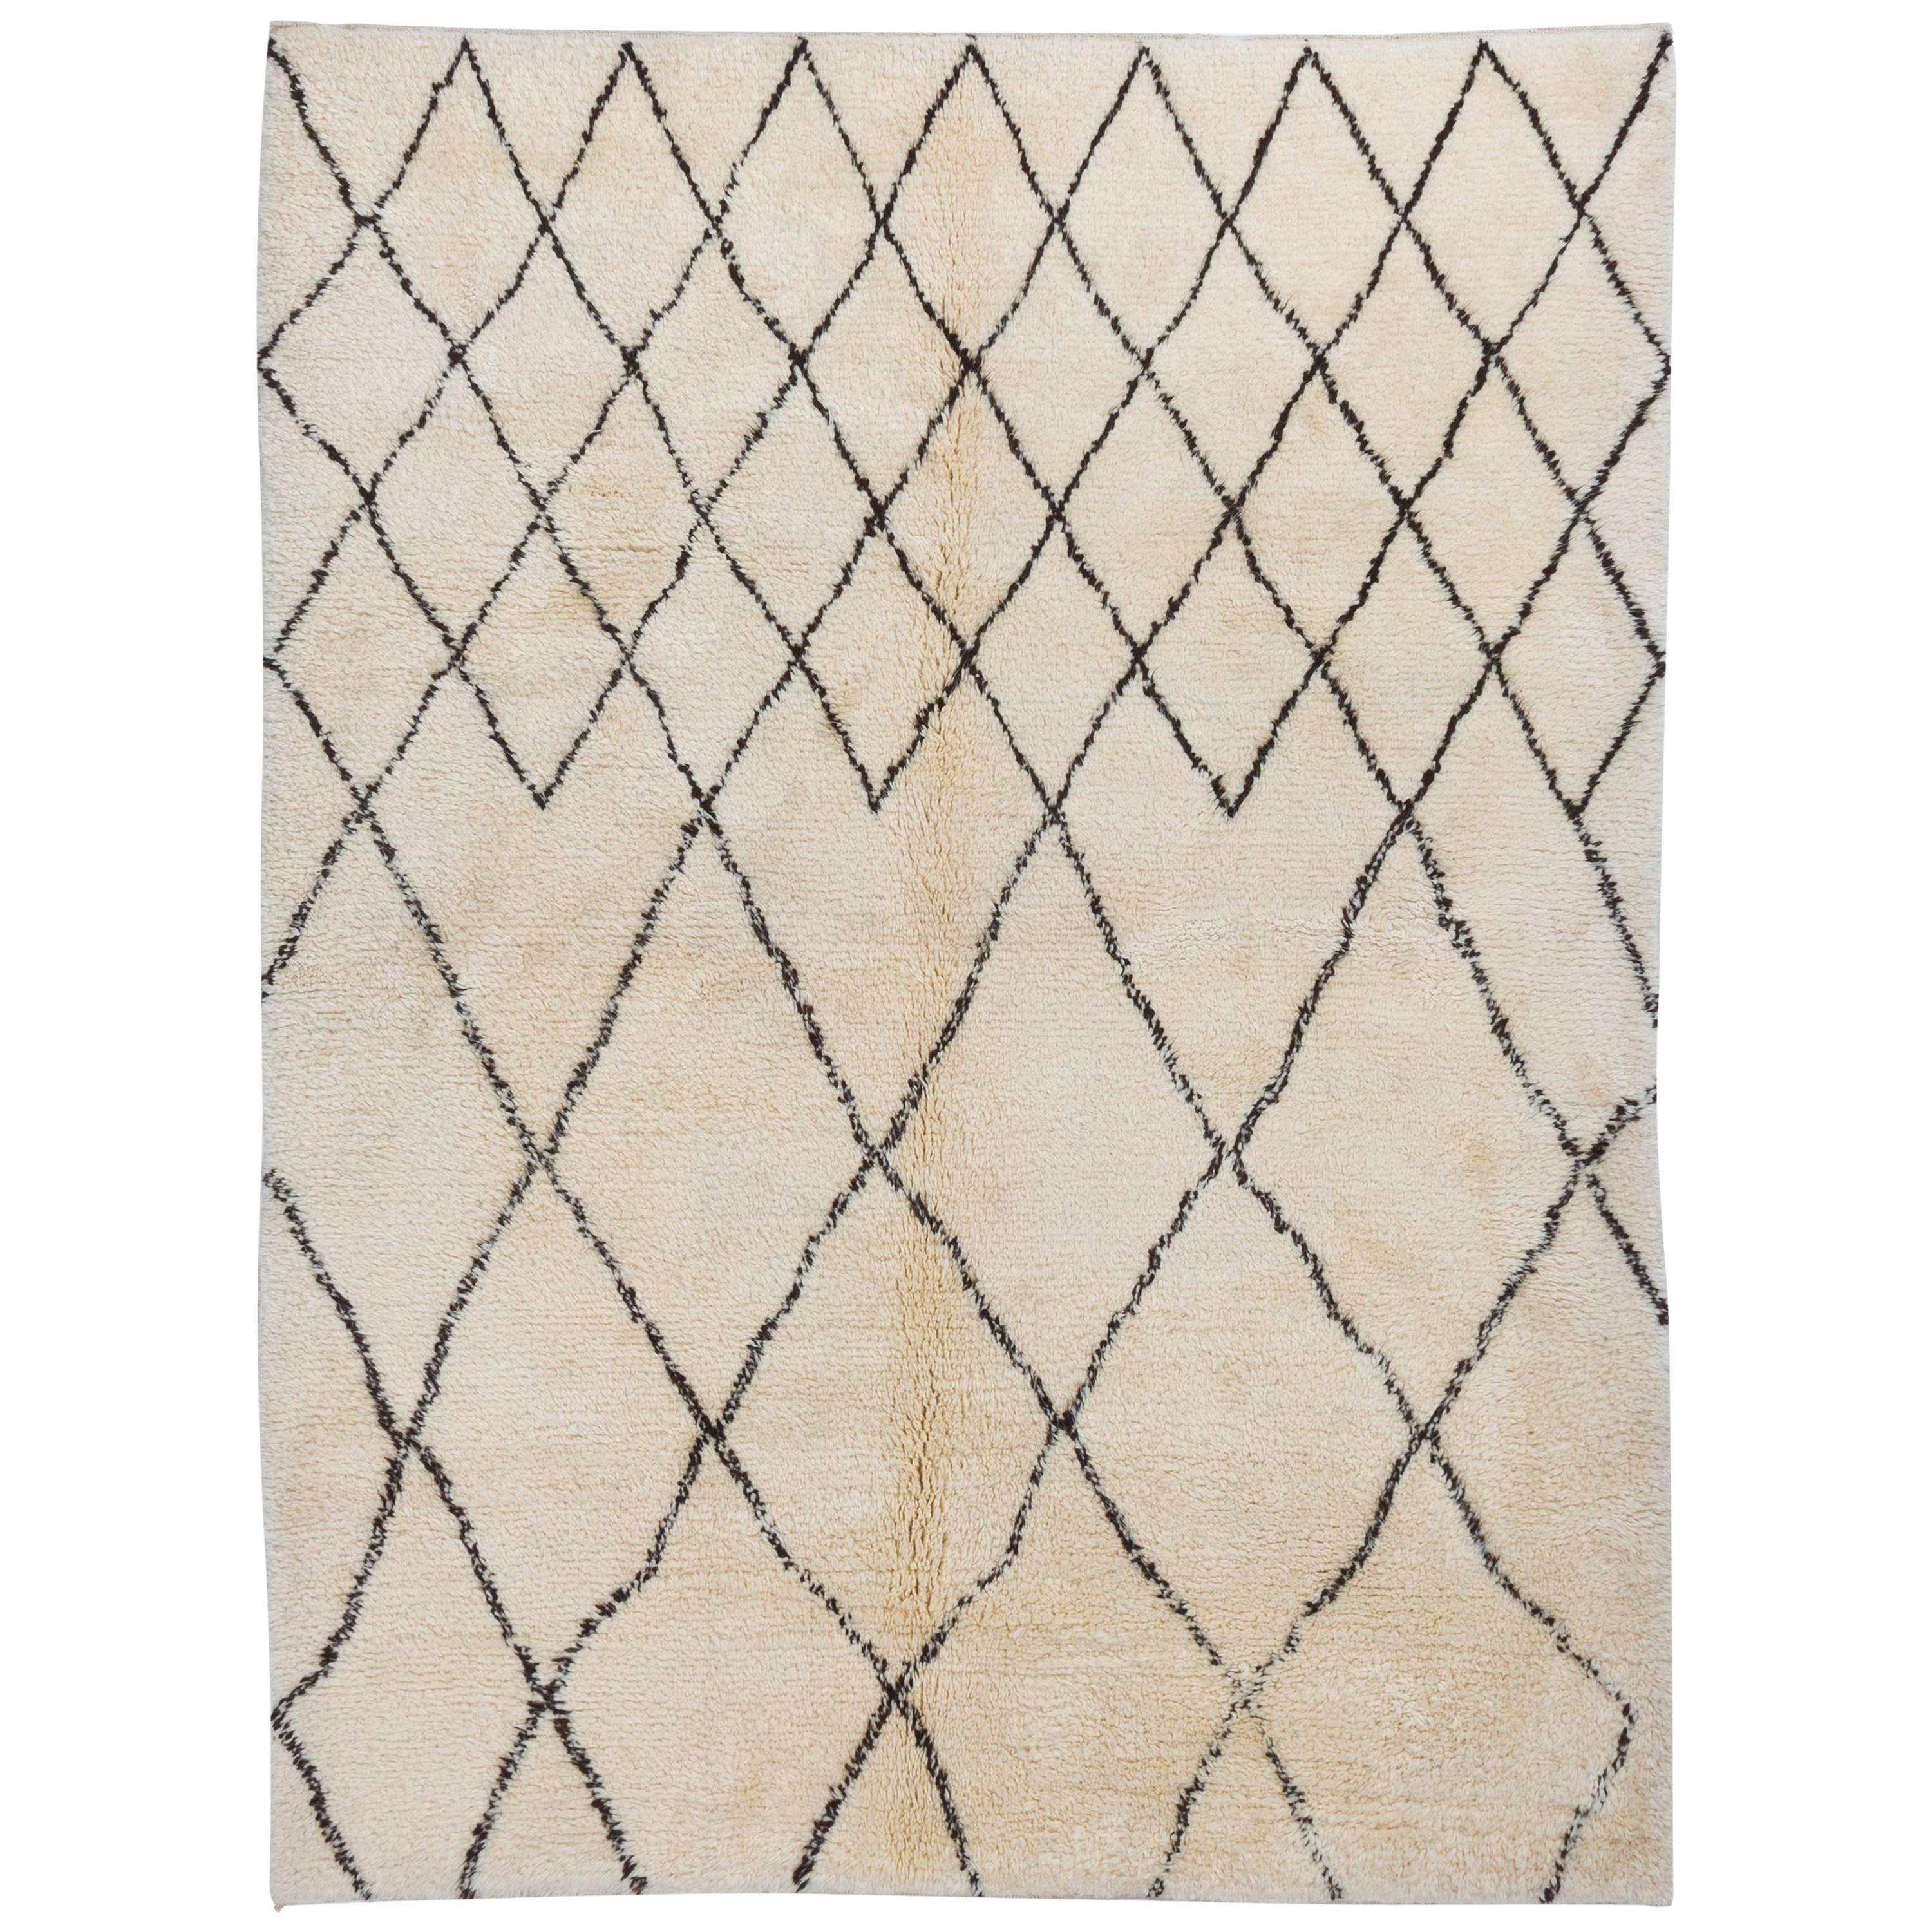 Beni Ourain Moroccan Tulu Rug Made of All Natural Wool. CUSTOM OPTIONS Available For Sale